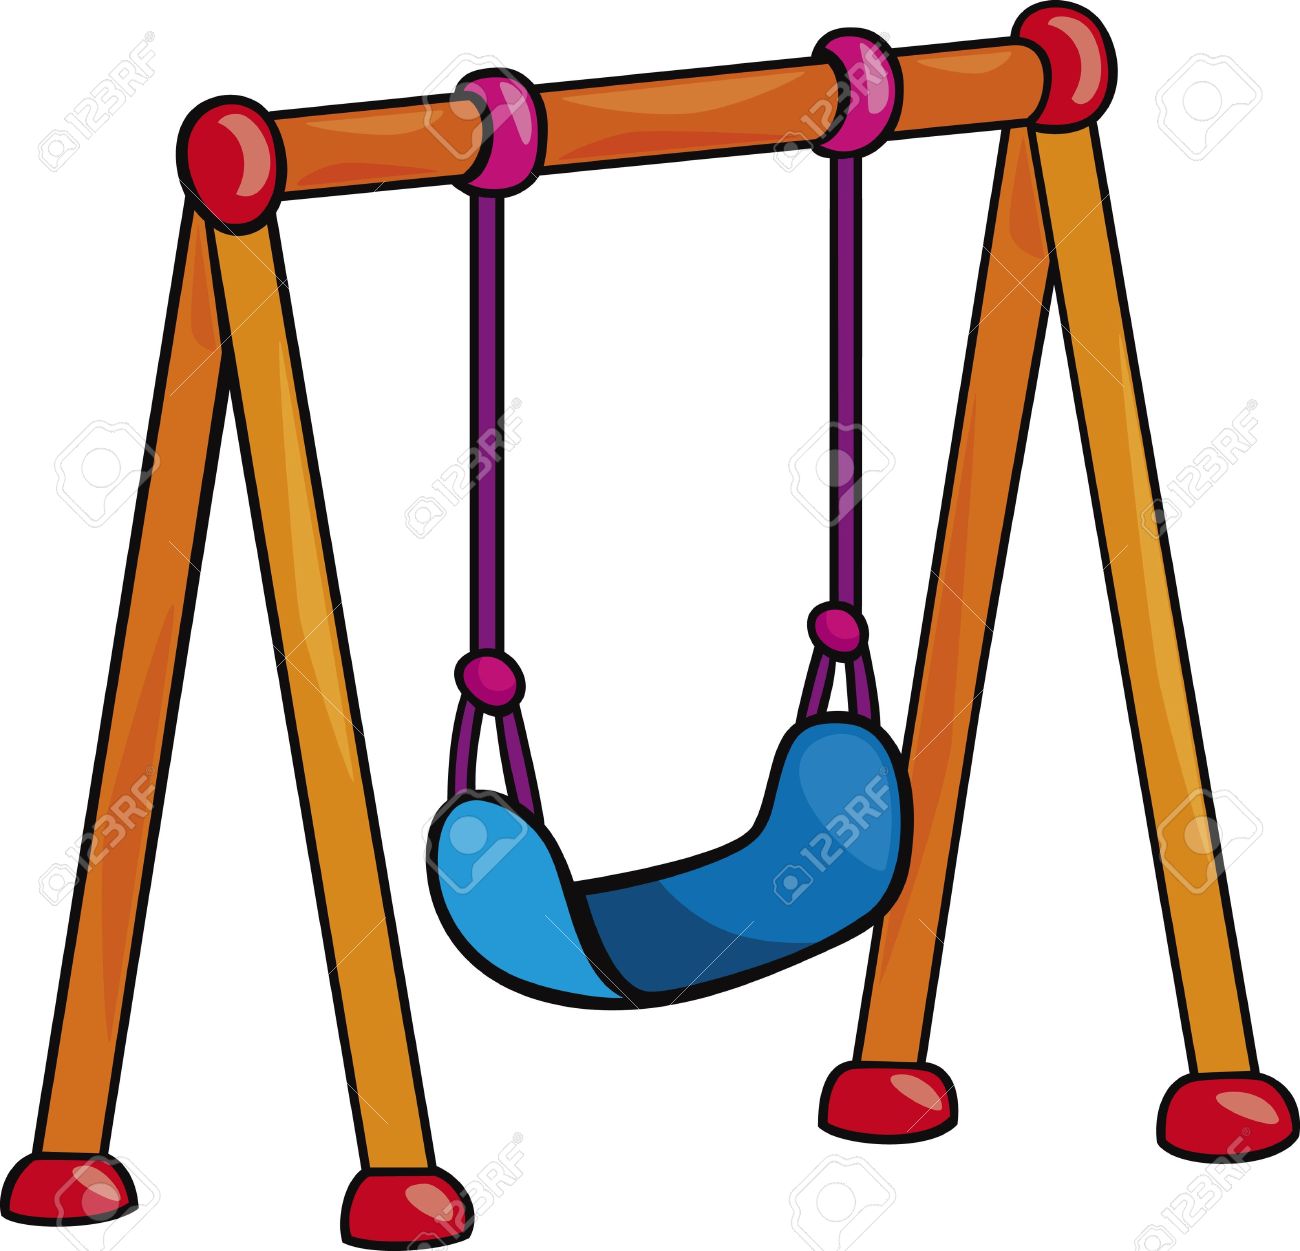 Free School Swing Cliparts, Download Free Clip Art, Free